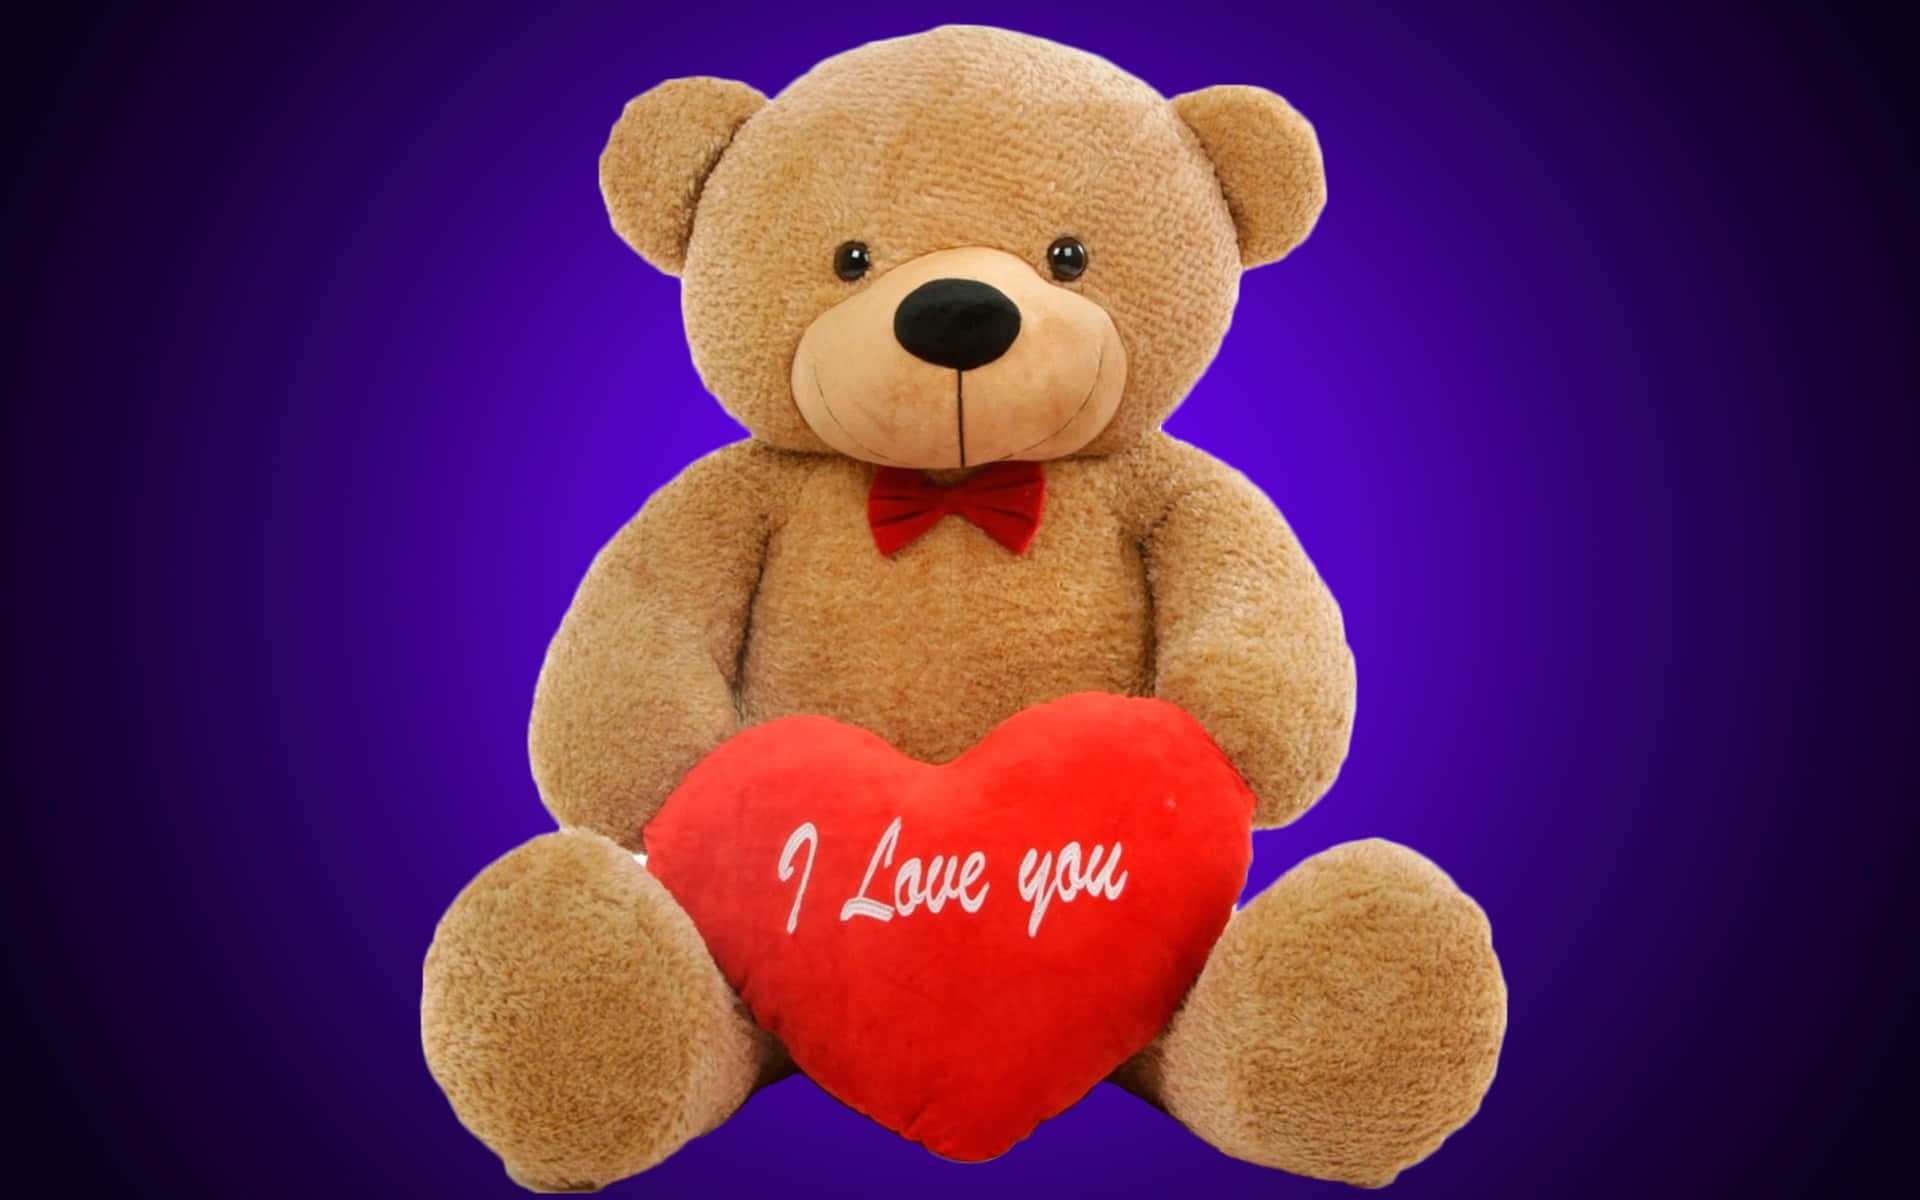 Spread love and warmth with this cuddly teddy bear.